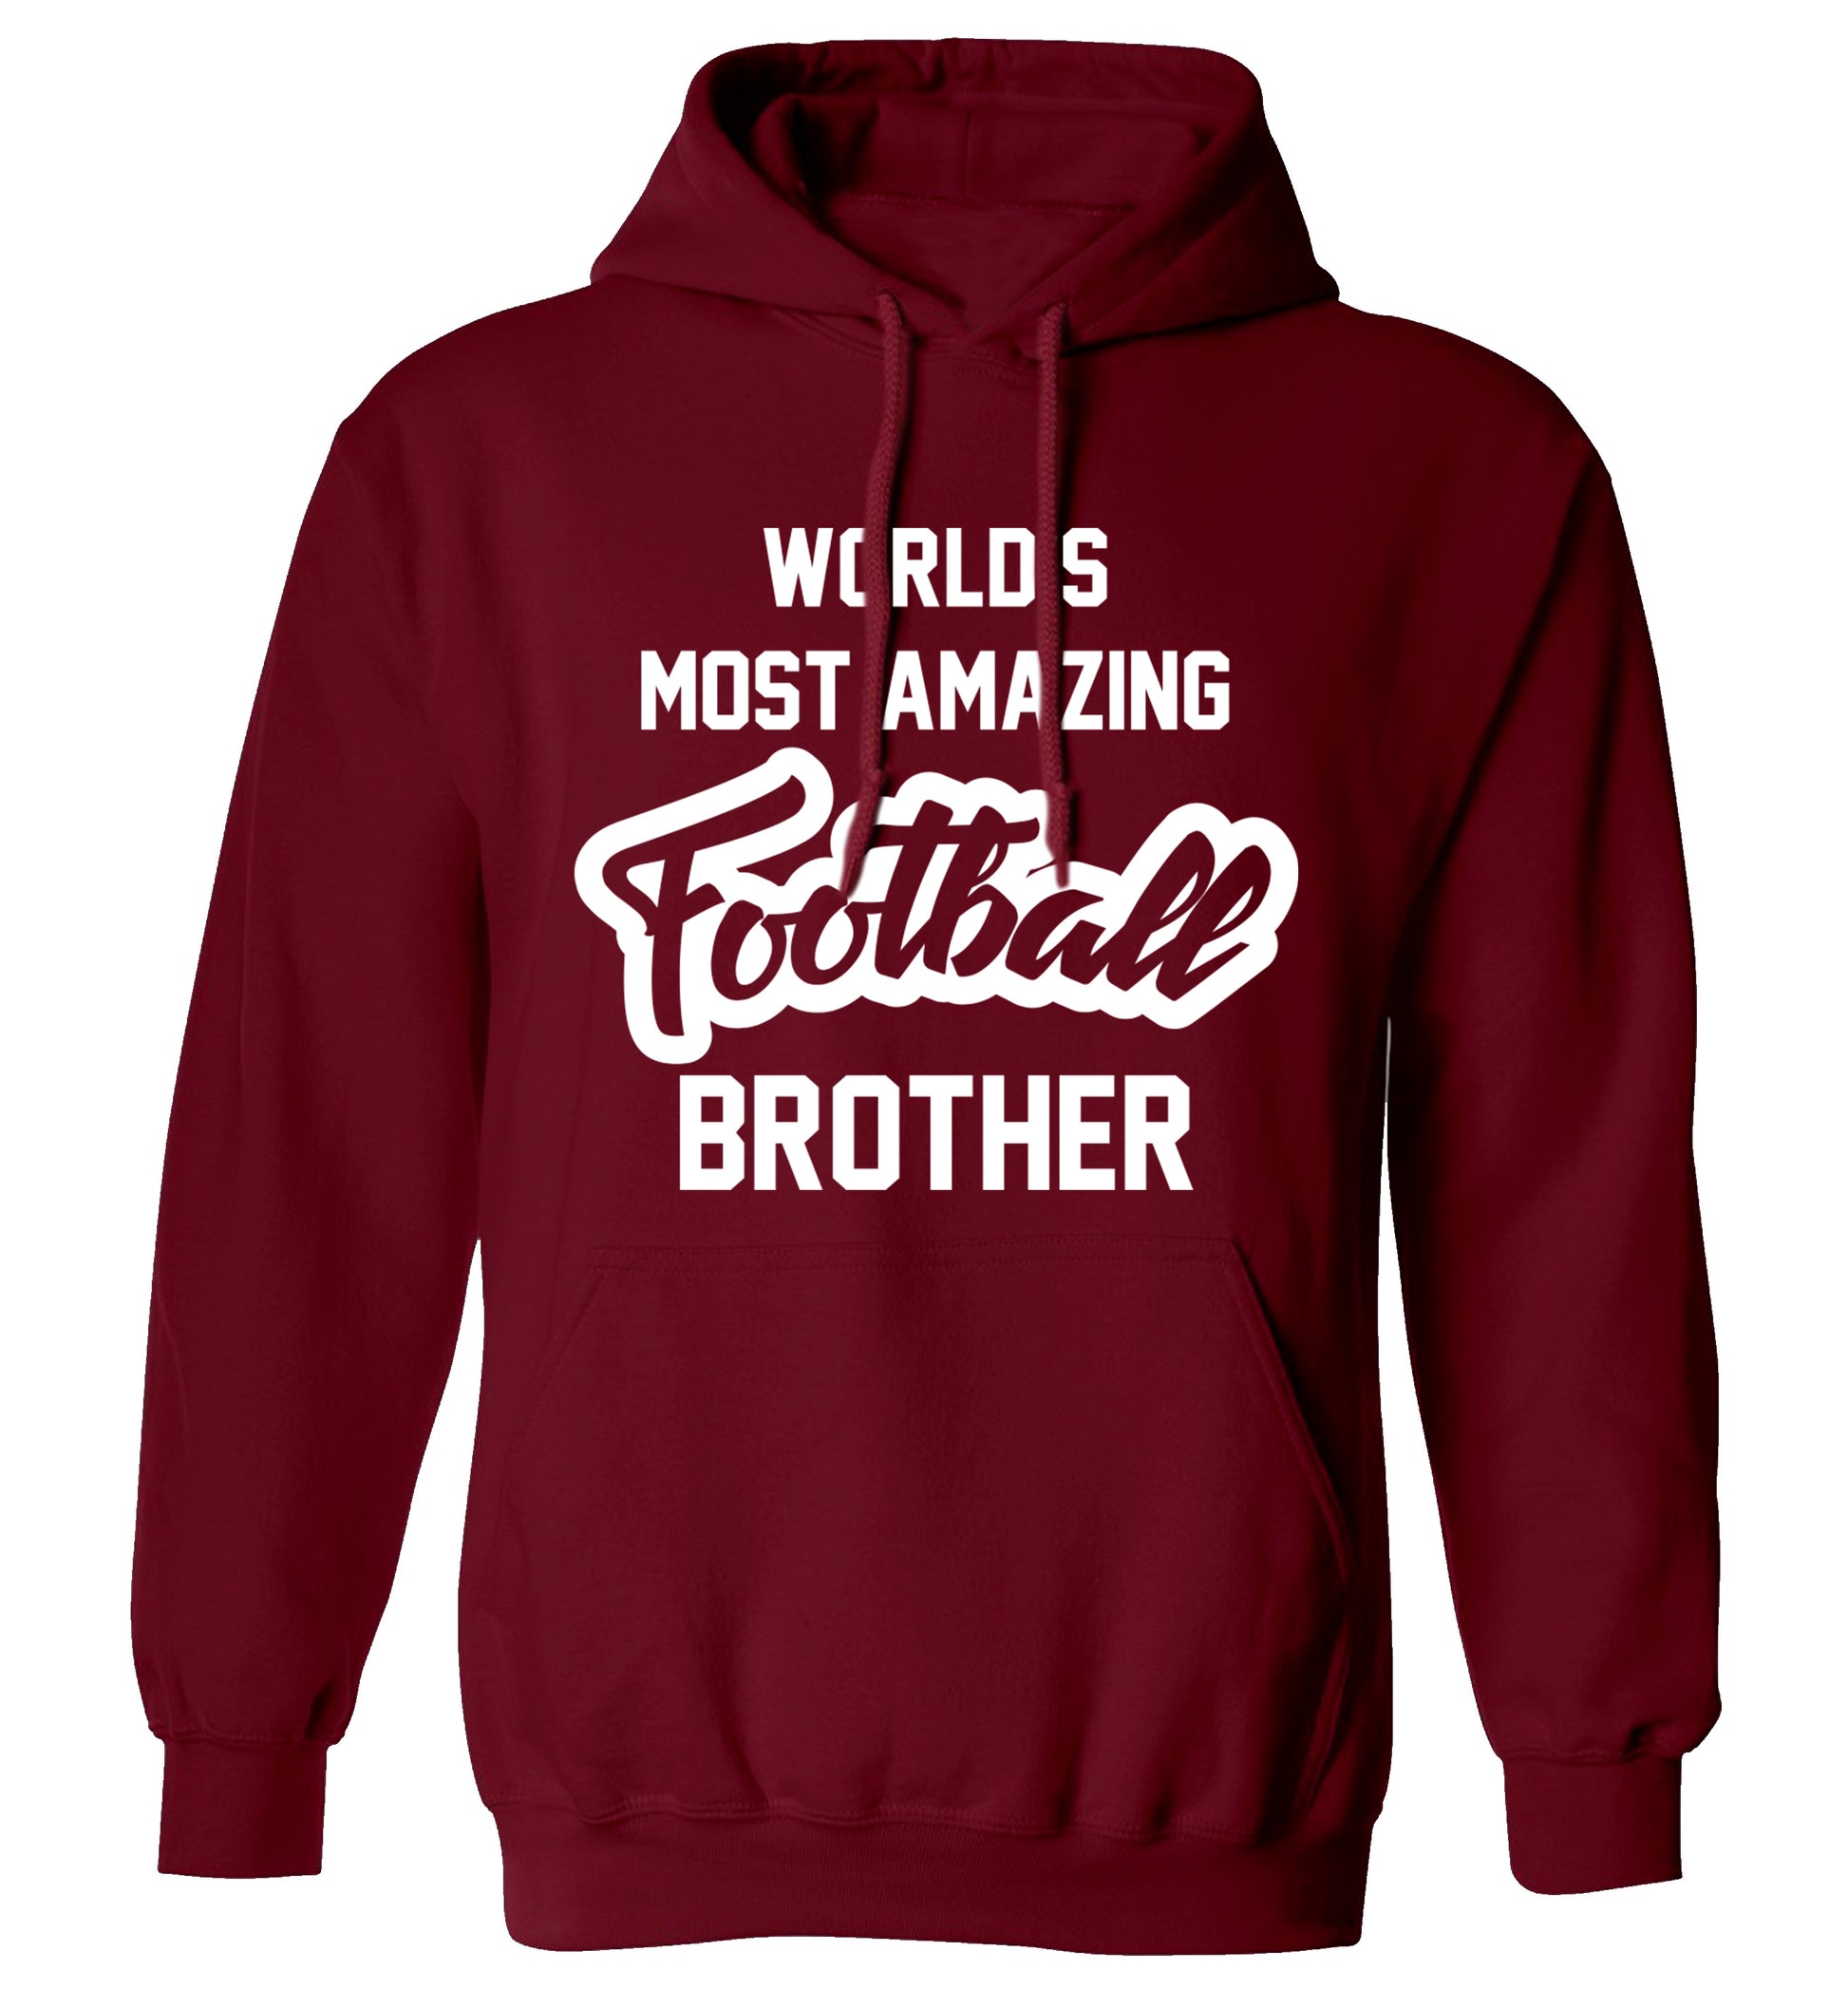 Worlds most amazing football brother adults unisexmaroon hoodie 2XL